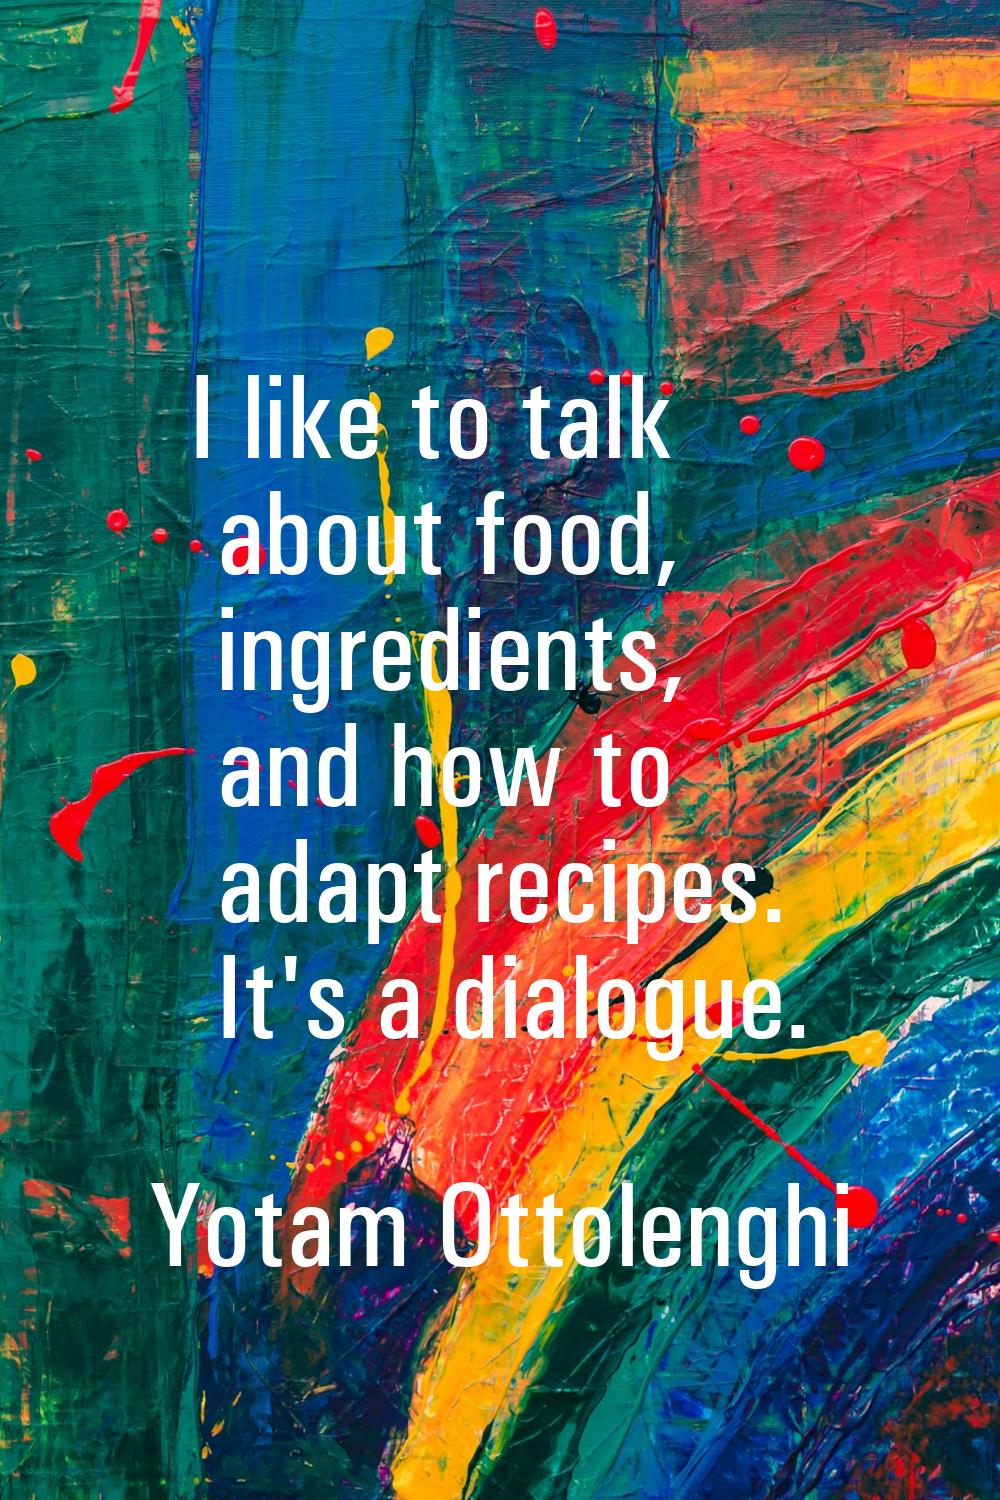 I like to talk about food, ingredients, and how to adapt recipes. It's a dialogue.